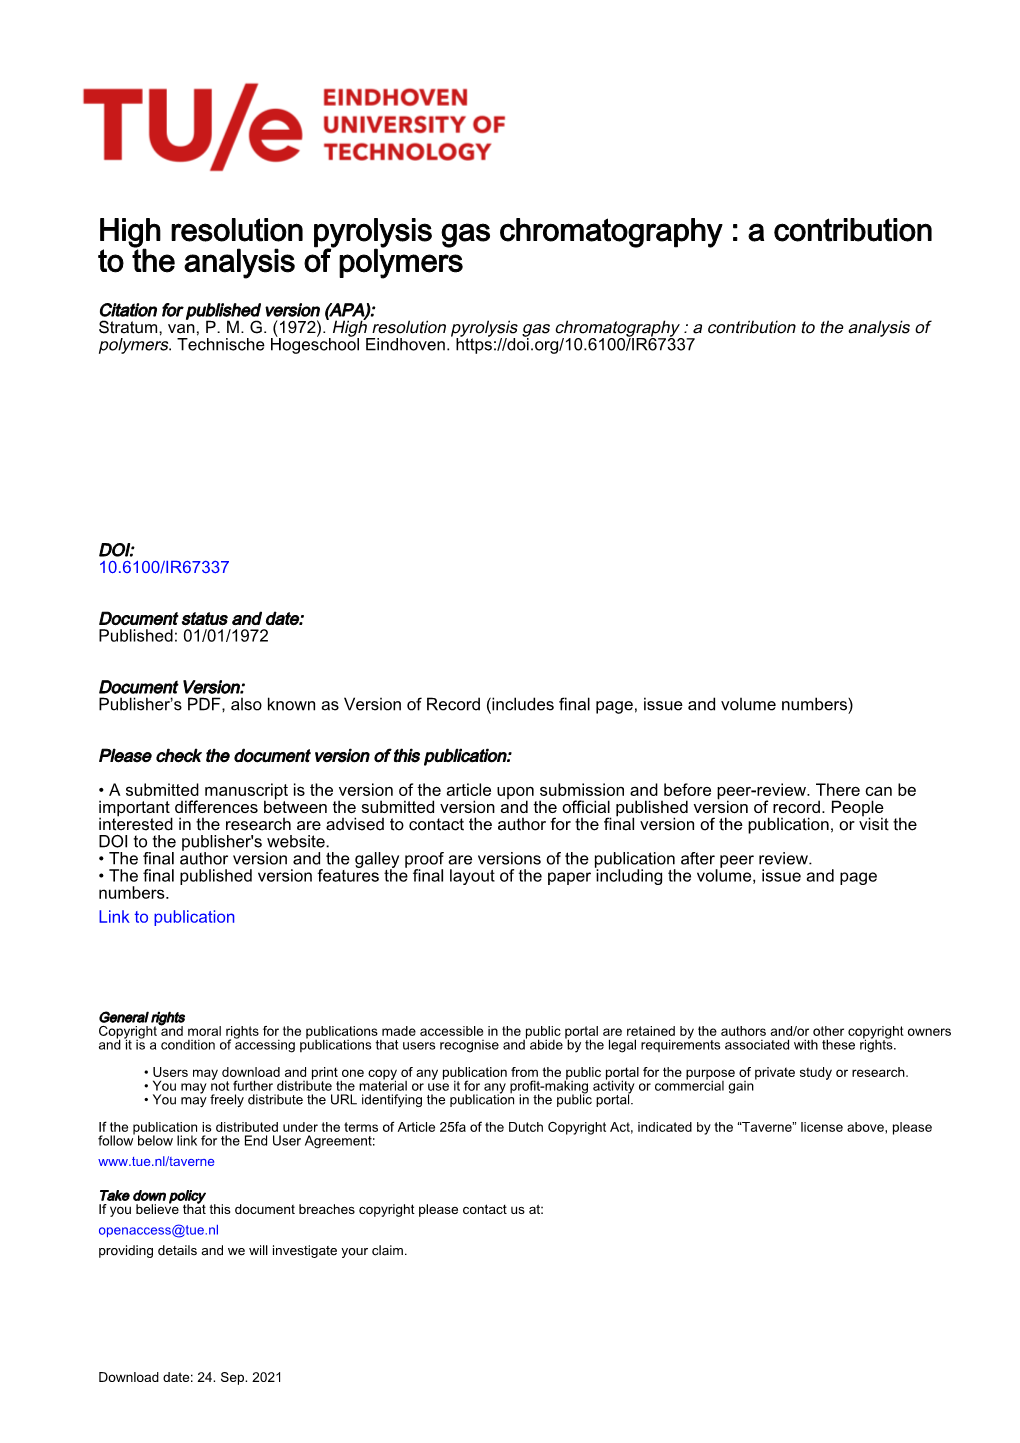 High Resolution Pyrolysis Gas Chromatography : a Contribution to the Analysis of Polymers